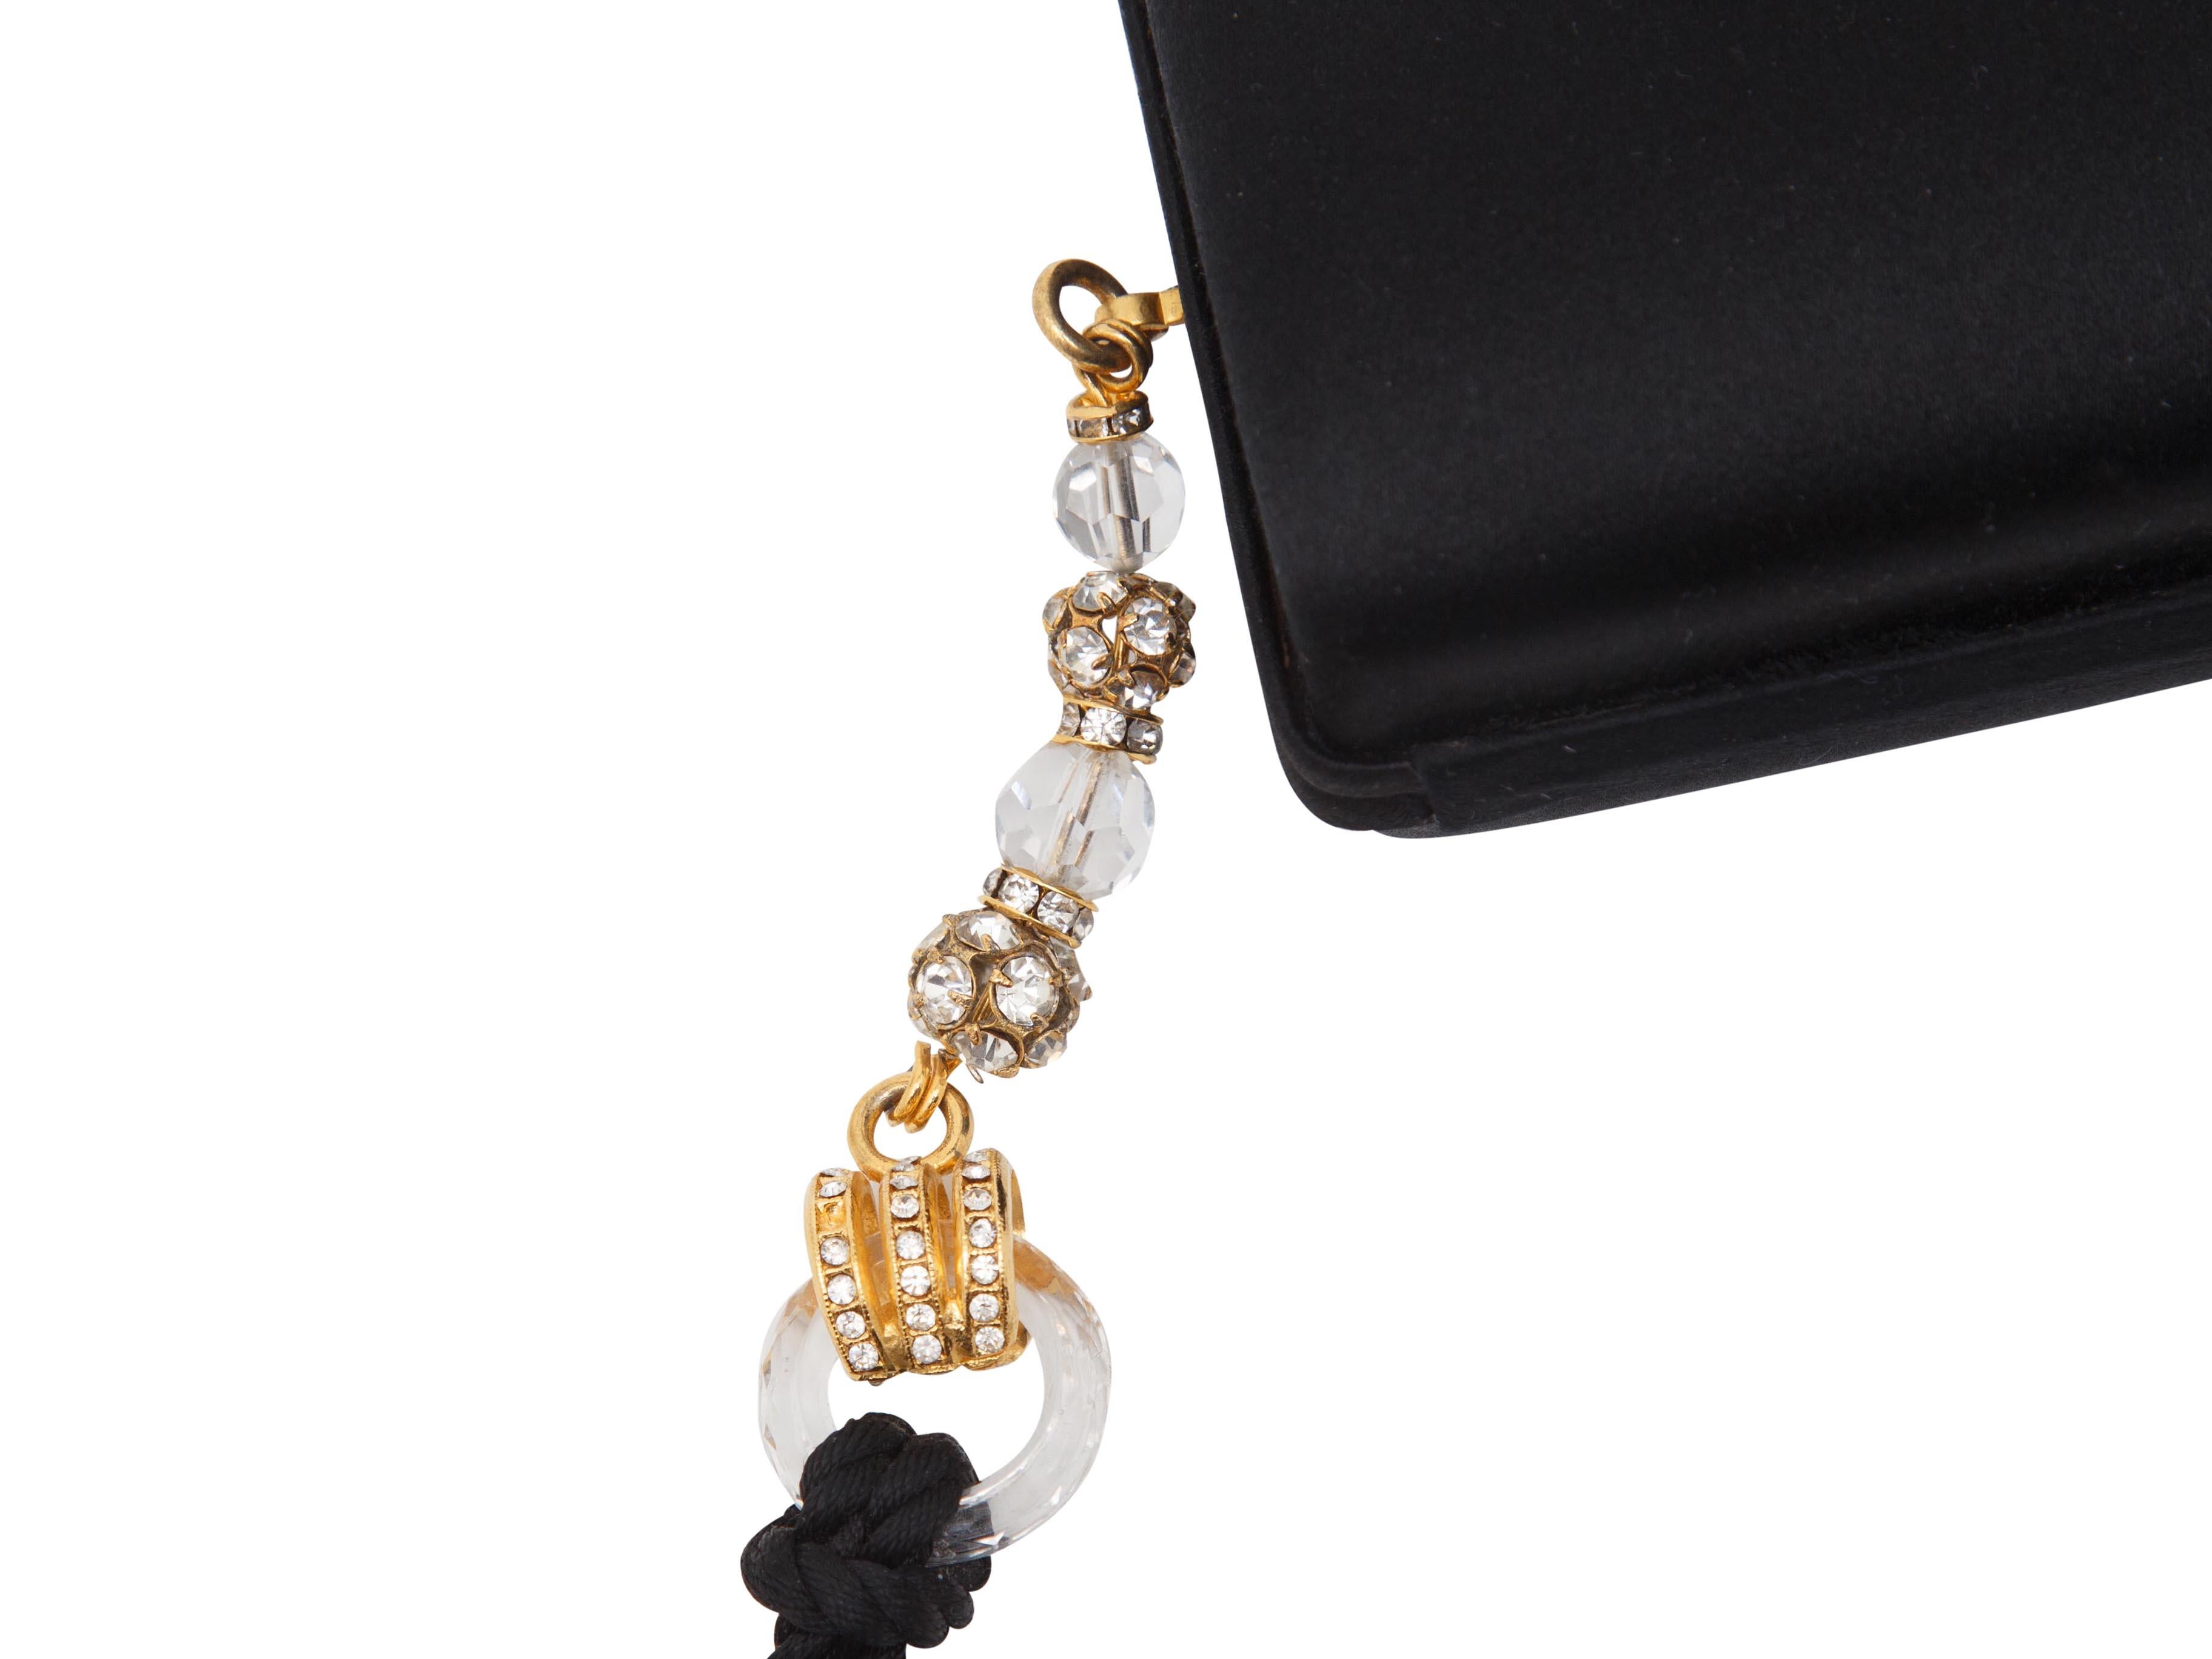 Product details:  Vintage black satin evening clutch by Escada.  Accented with an oversized tassel.  Top crystal-accented push-lock closure.  Lined interior.  Goldtone hardware.  5.5